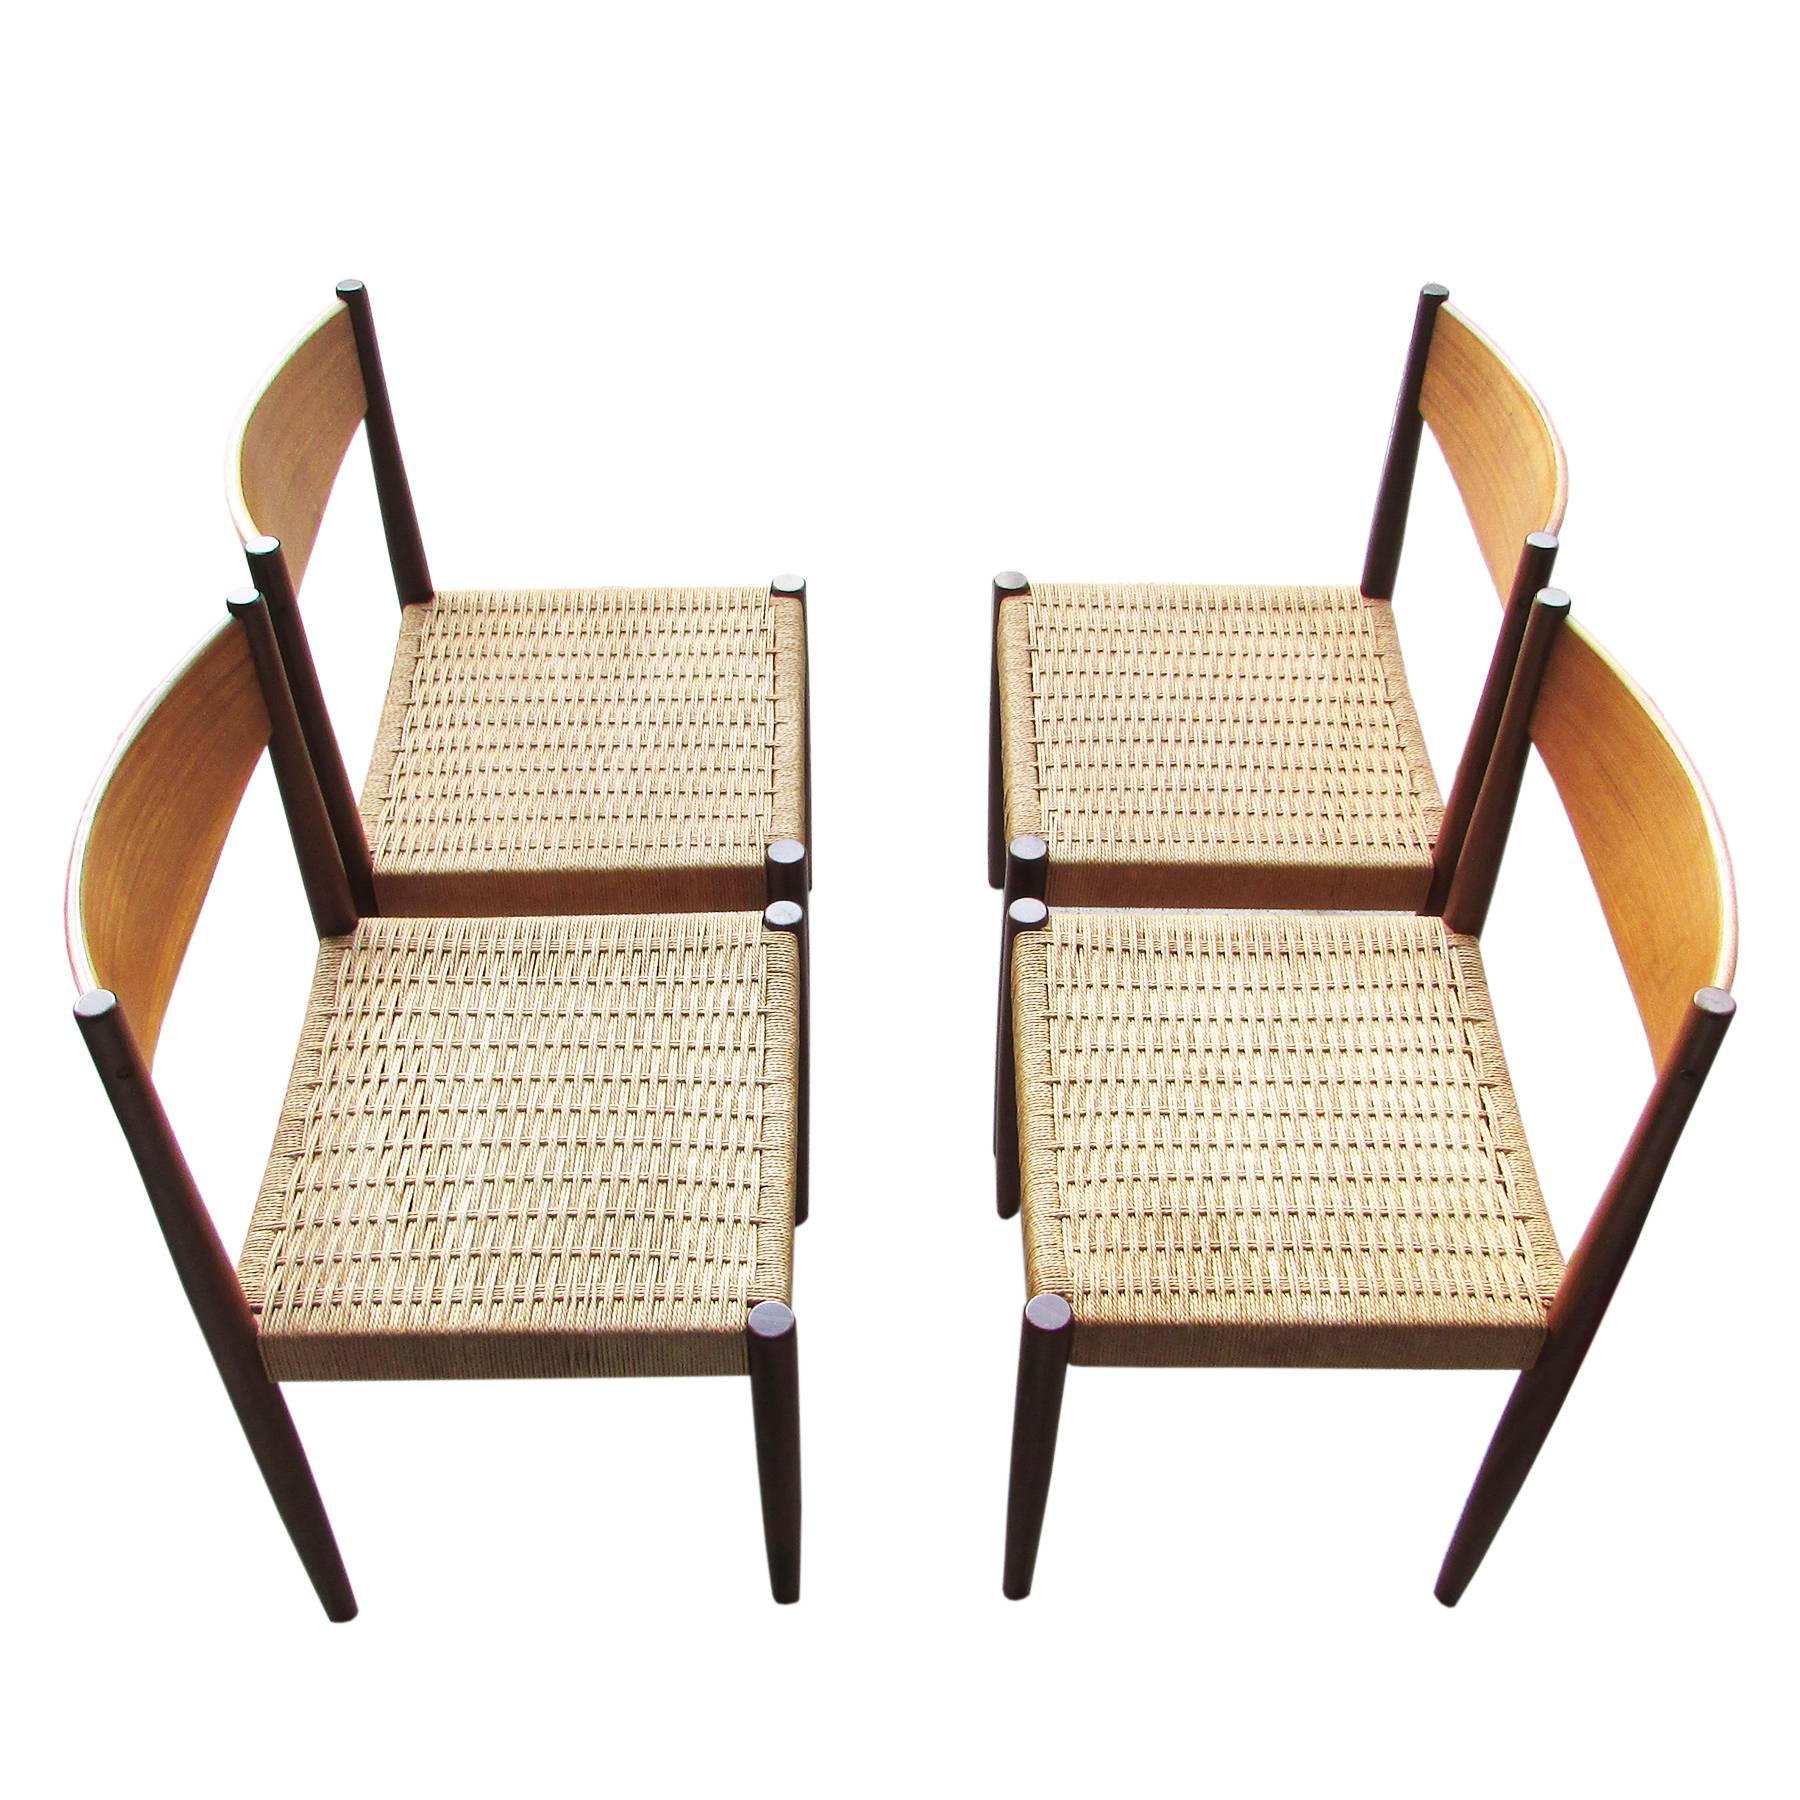 1960 Teak Dining Chairs Sigh & Søn, Set of Four